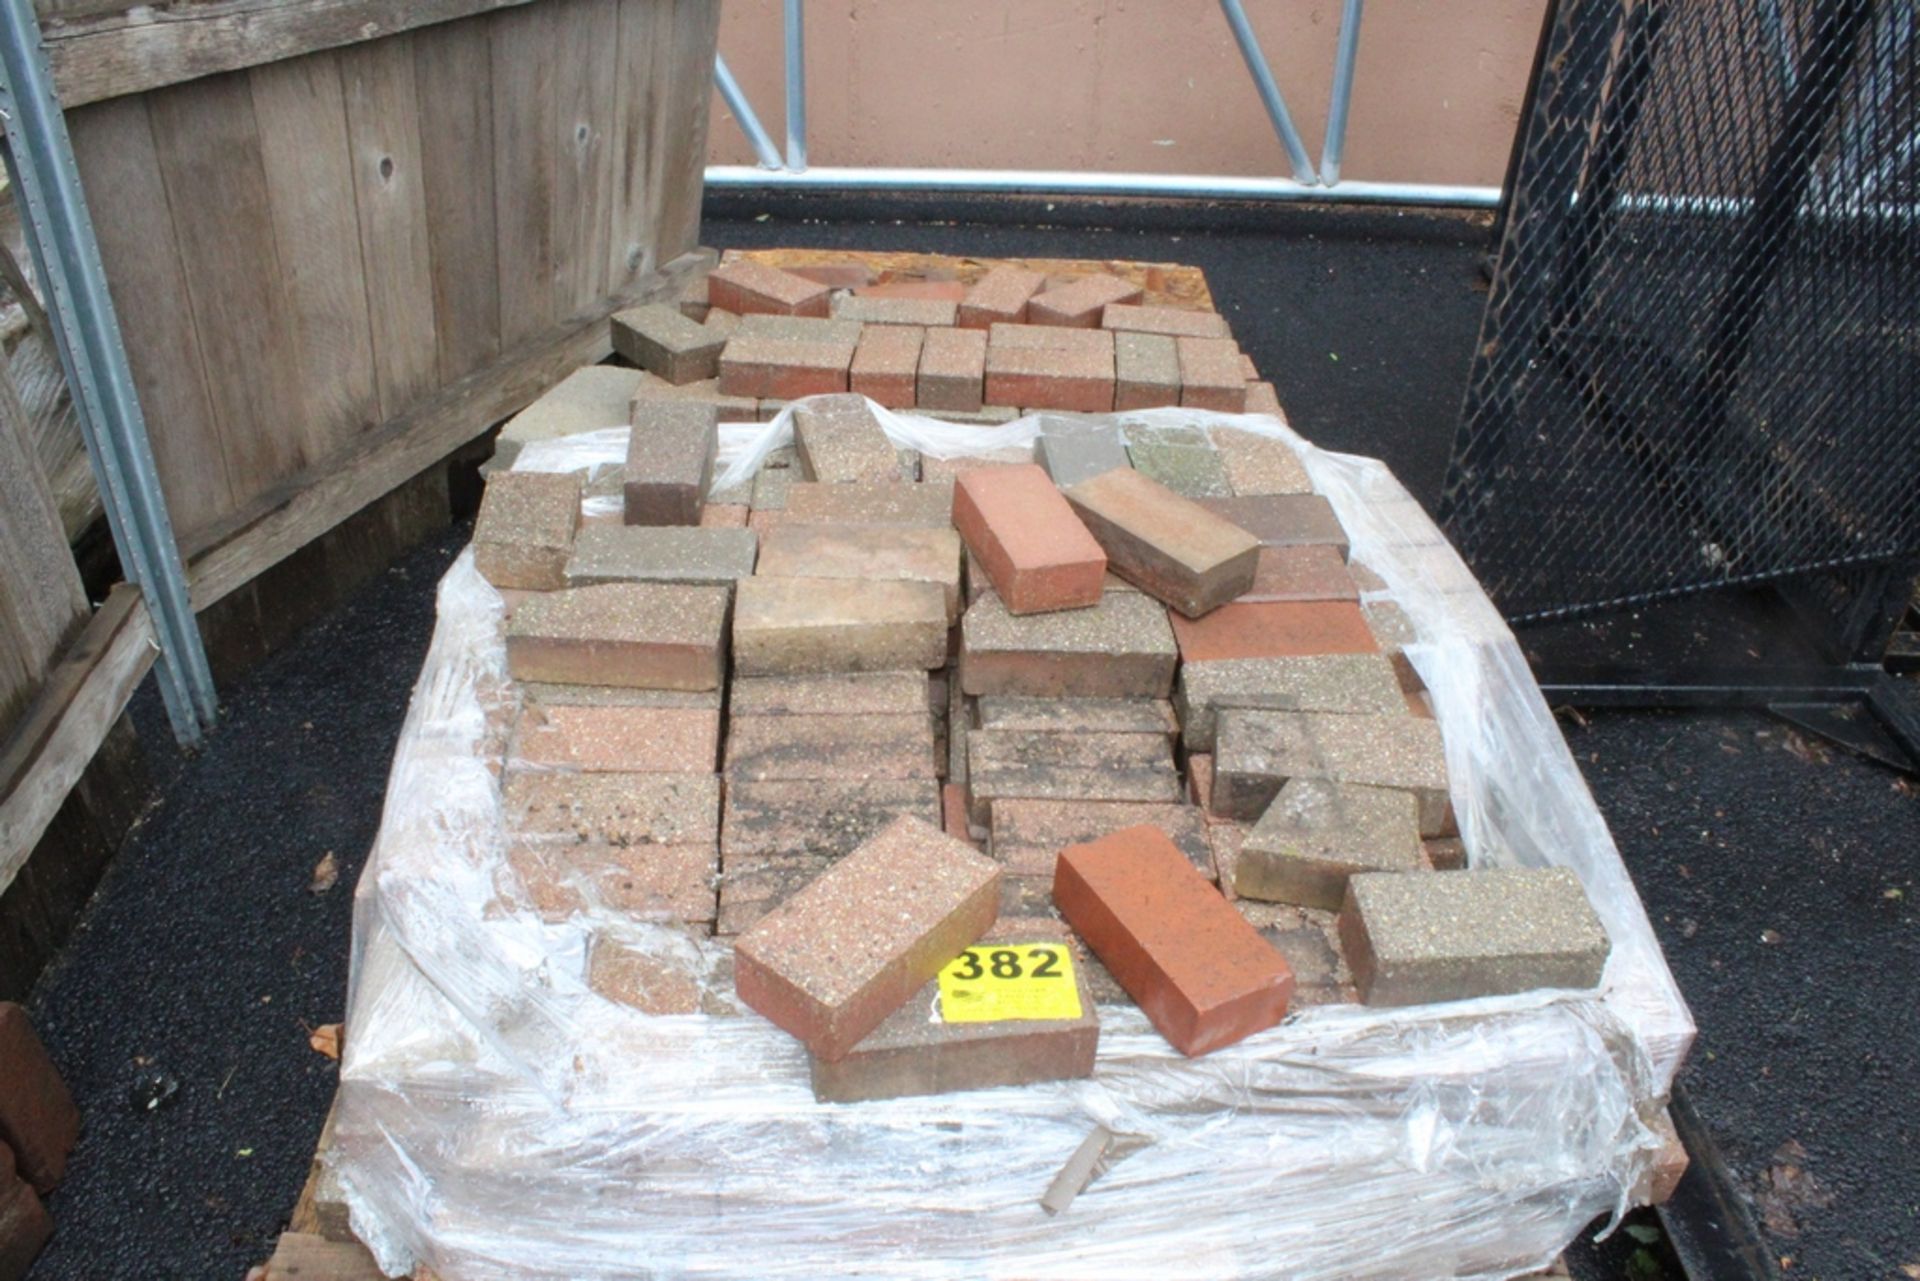 ASSORTED BRICKS ON TWO SKIDS - THIS ITEM LOCATED AT 1530 WILEY ROAD, SCHAUMBURG, IL